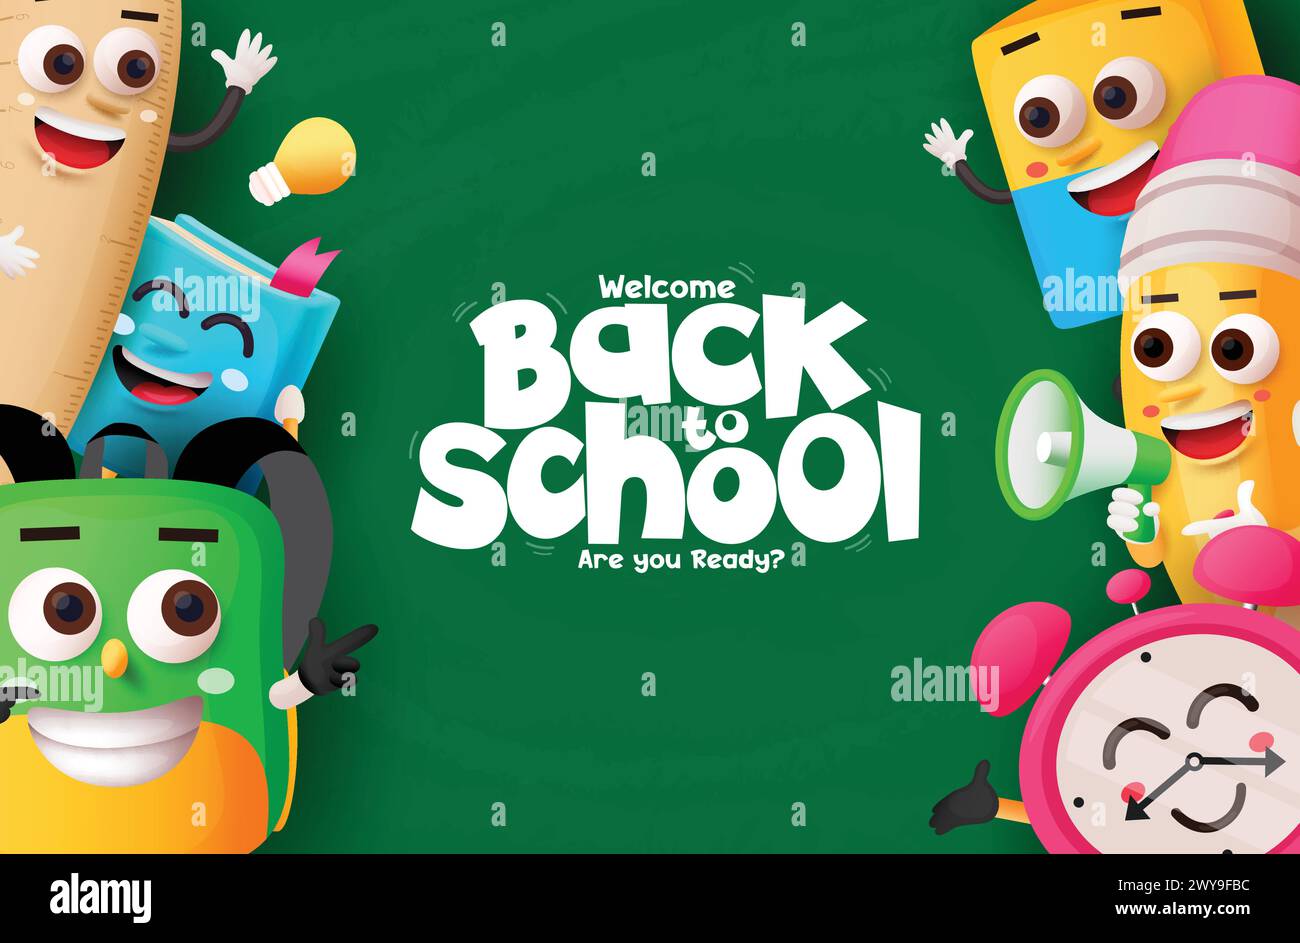 Back to school greeting vector template. Welcome back to school text with ruler, bag, books, pencil and alarm clock cartoon characters in learning Stock Vector